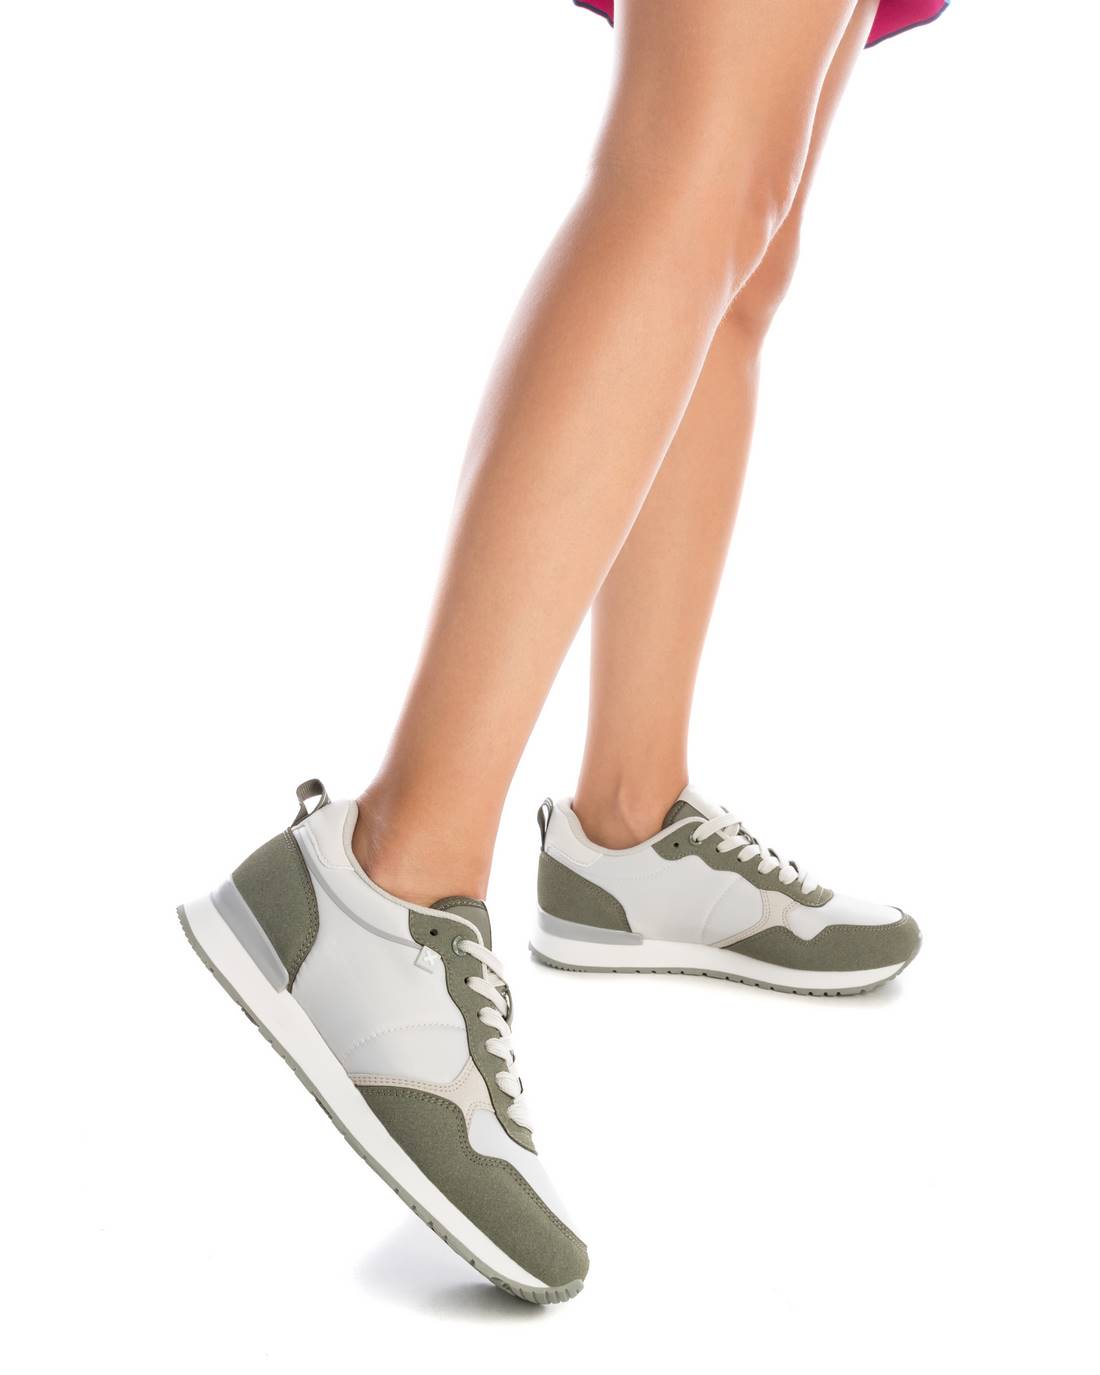     Front view of XTI Vegan Certified Runners in white, olive green, and soft grey.